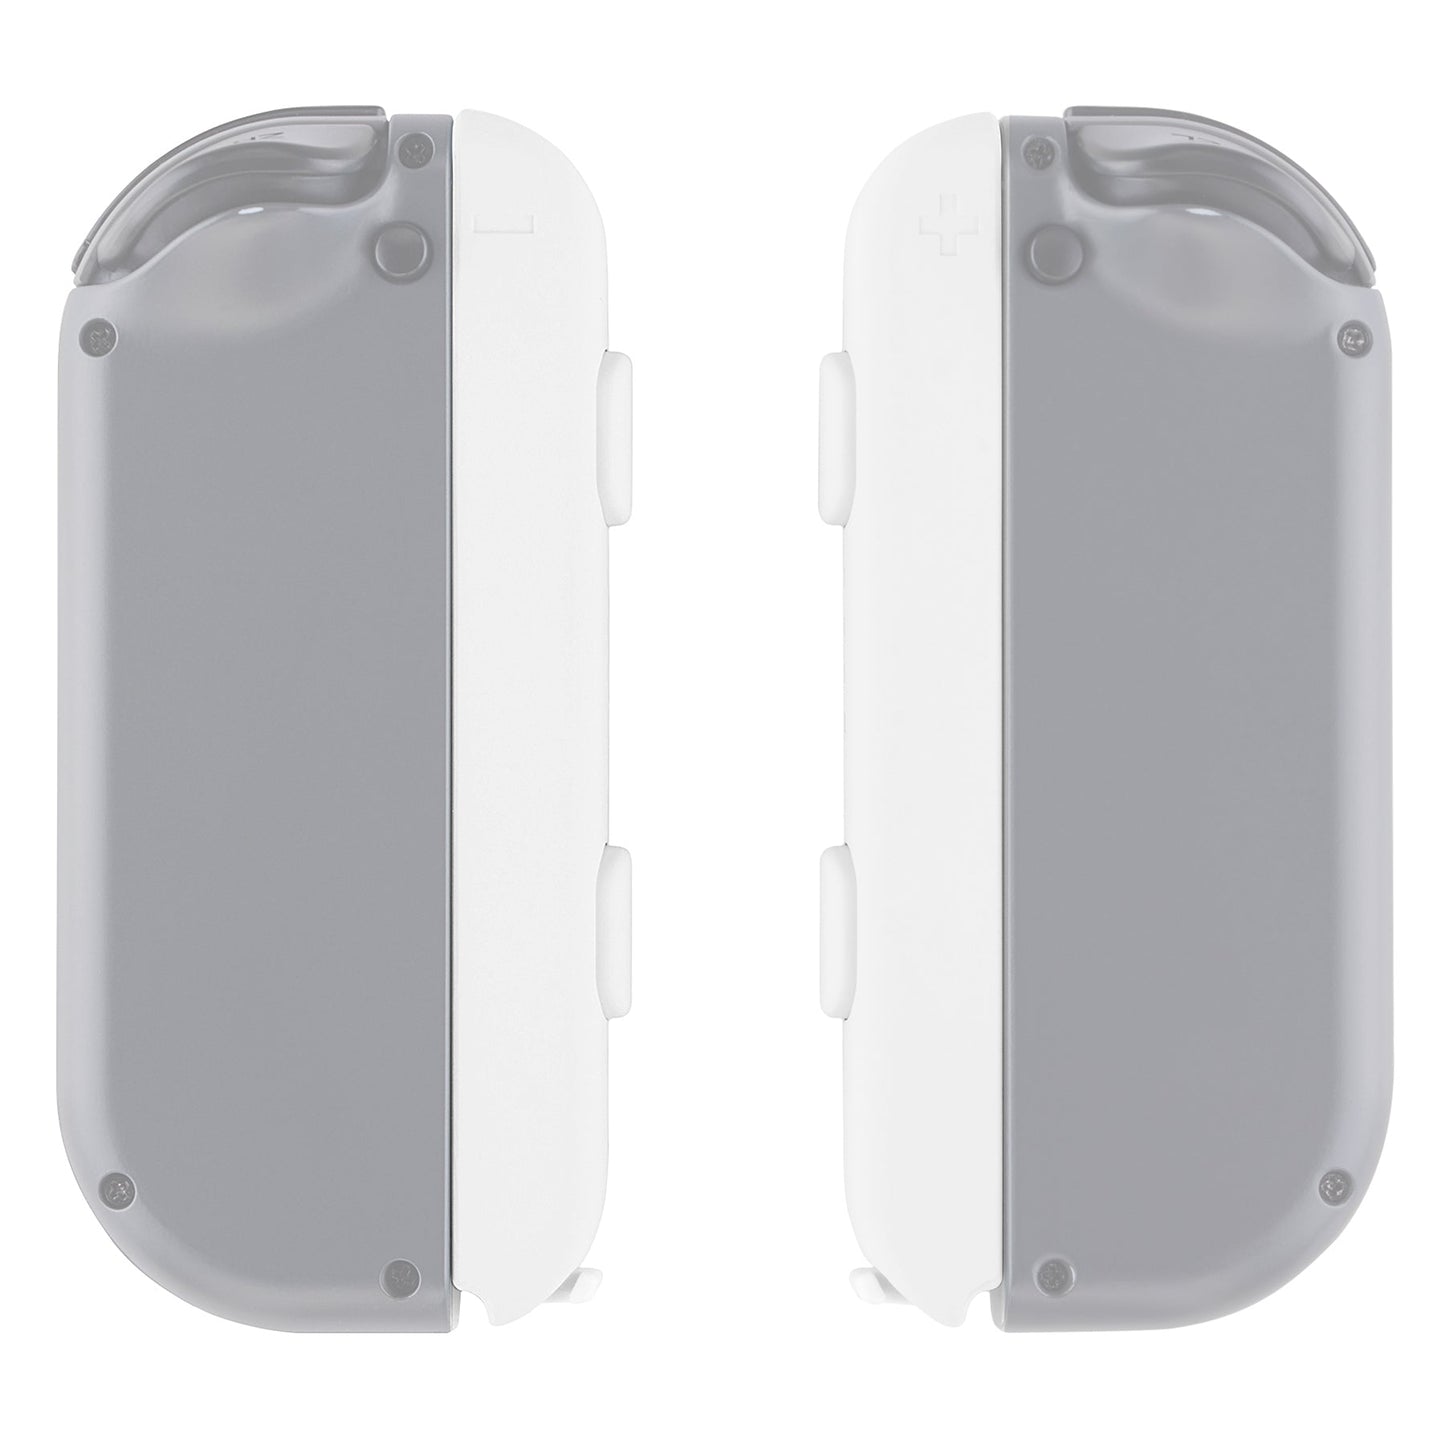 eXtremeRate Retail White Soft Touch Replacement shell for Nintendo Switch Joycon Strap, Custom Joy-Con Wrist Strap Housing Buttons for Nintendo Switch - 2 Pack - UEP303